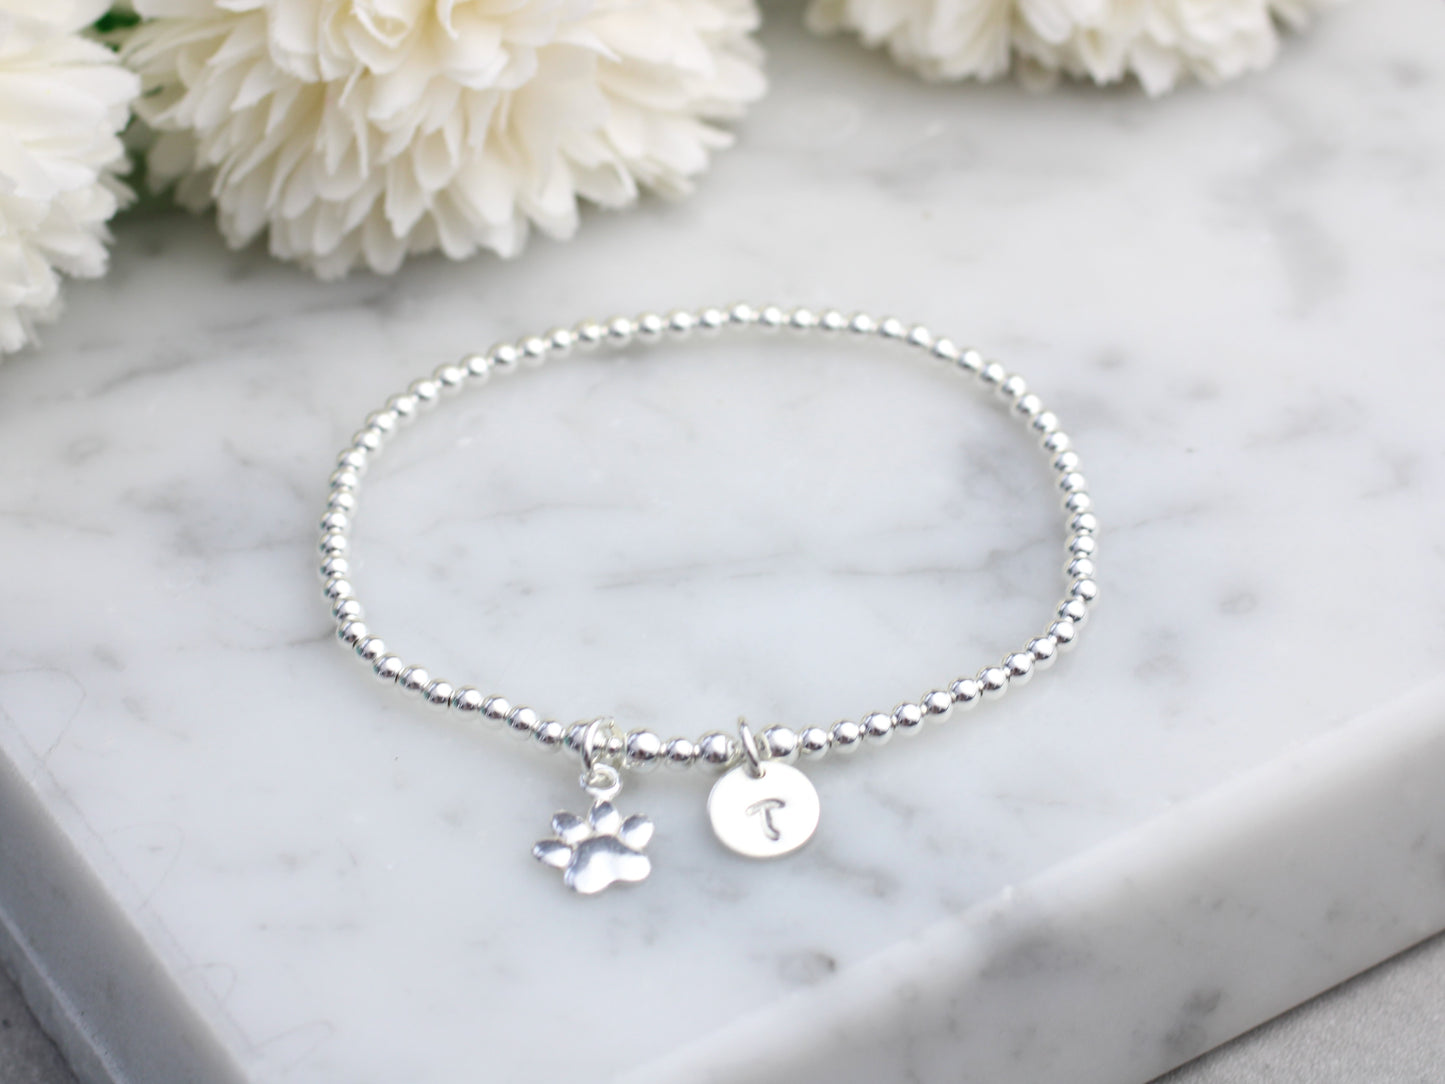 Personalised sterling silver paw print bracelet. Pet remembrance gift.